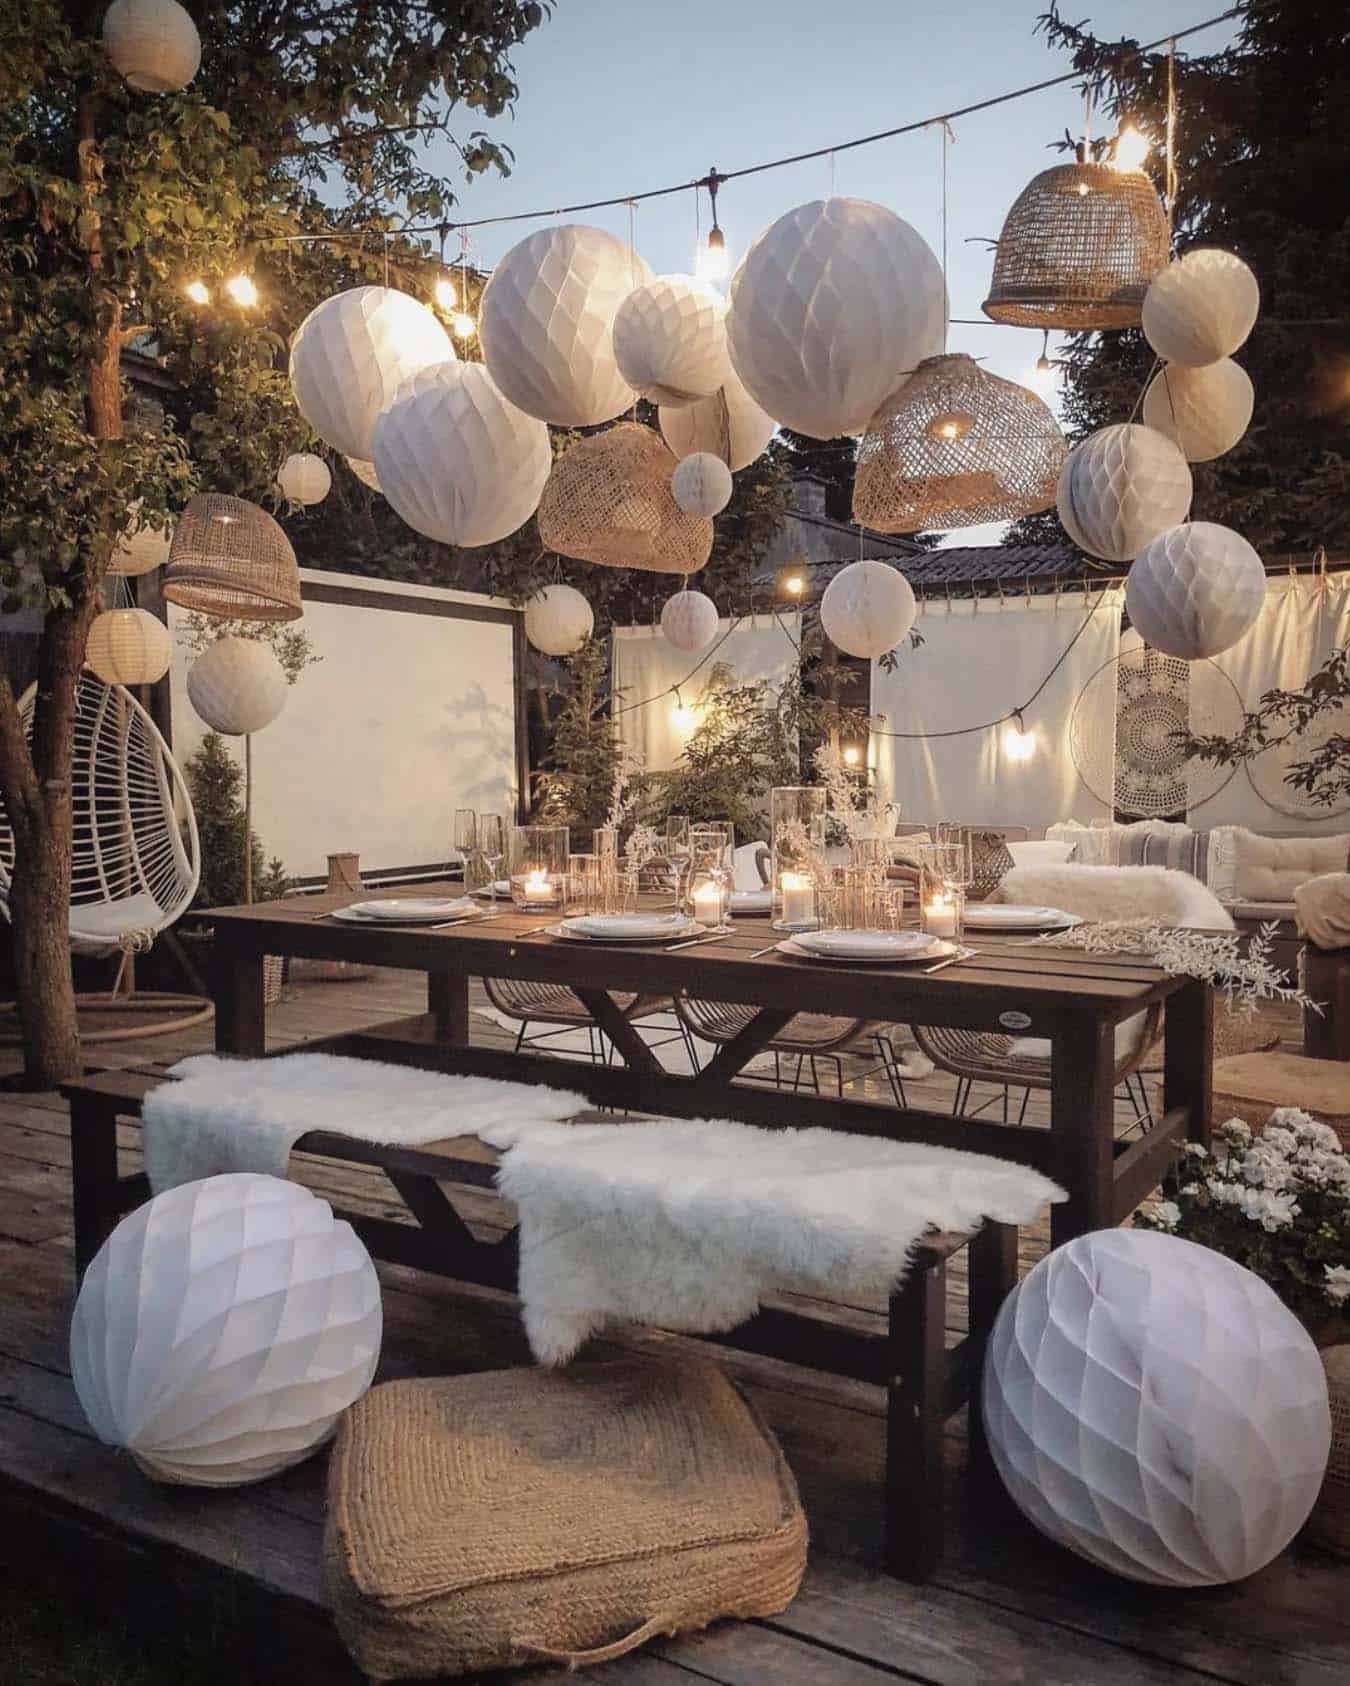 outdoor dining table with privacy screens and a movie projector along with string lights and hanging lamps